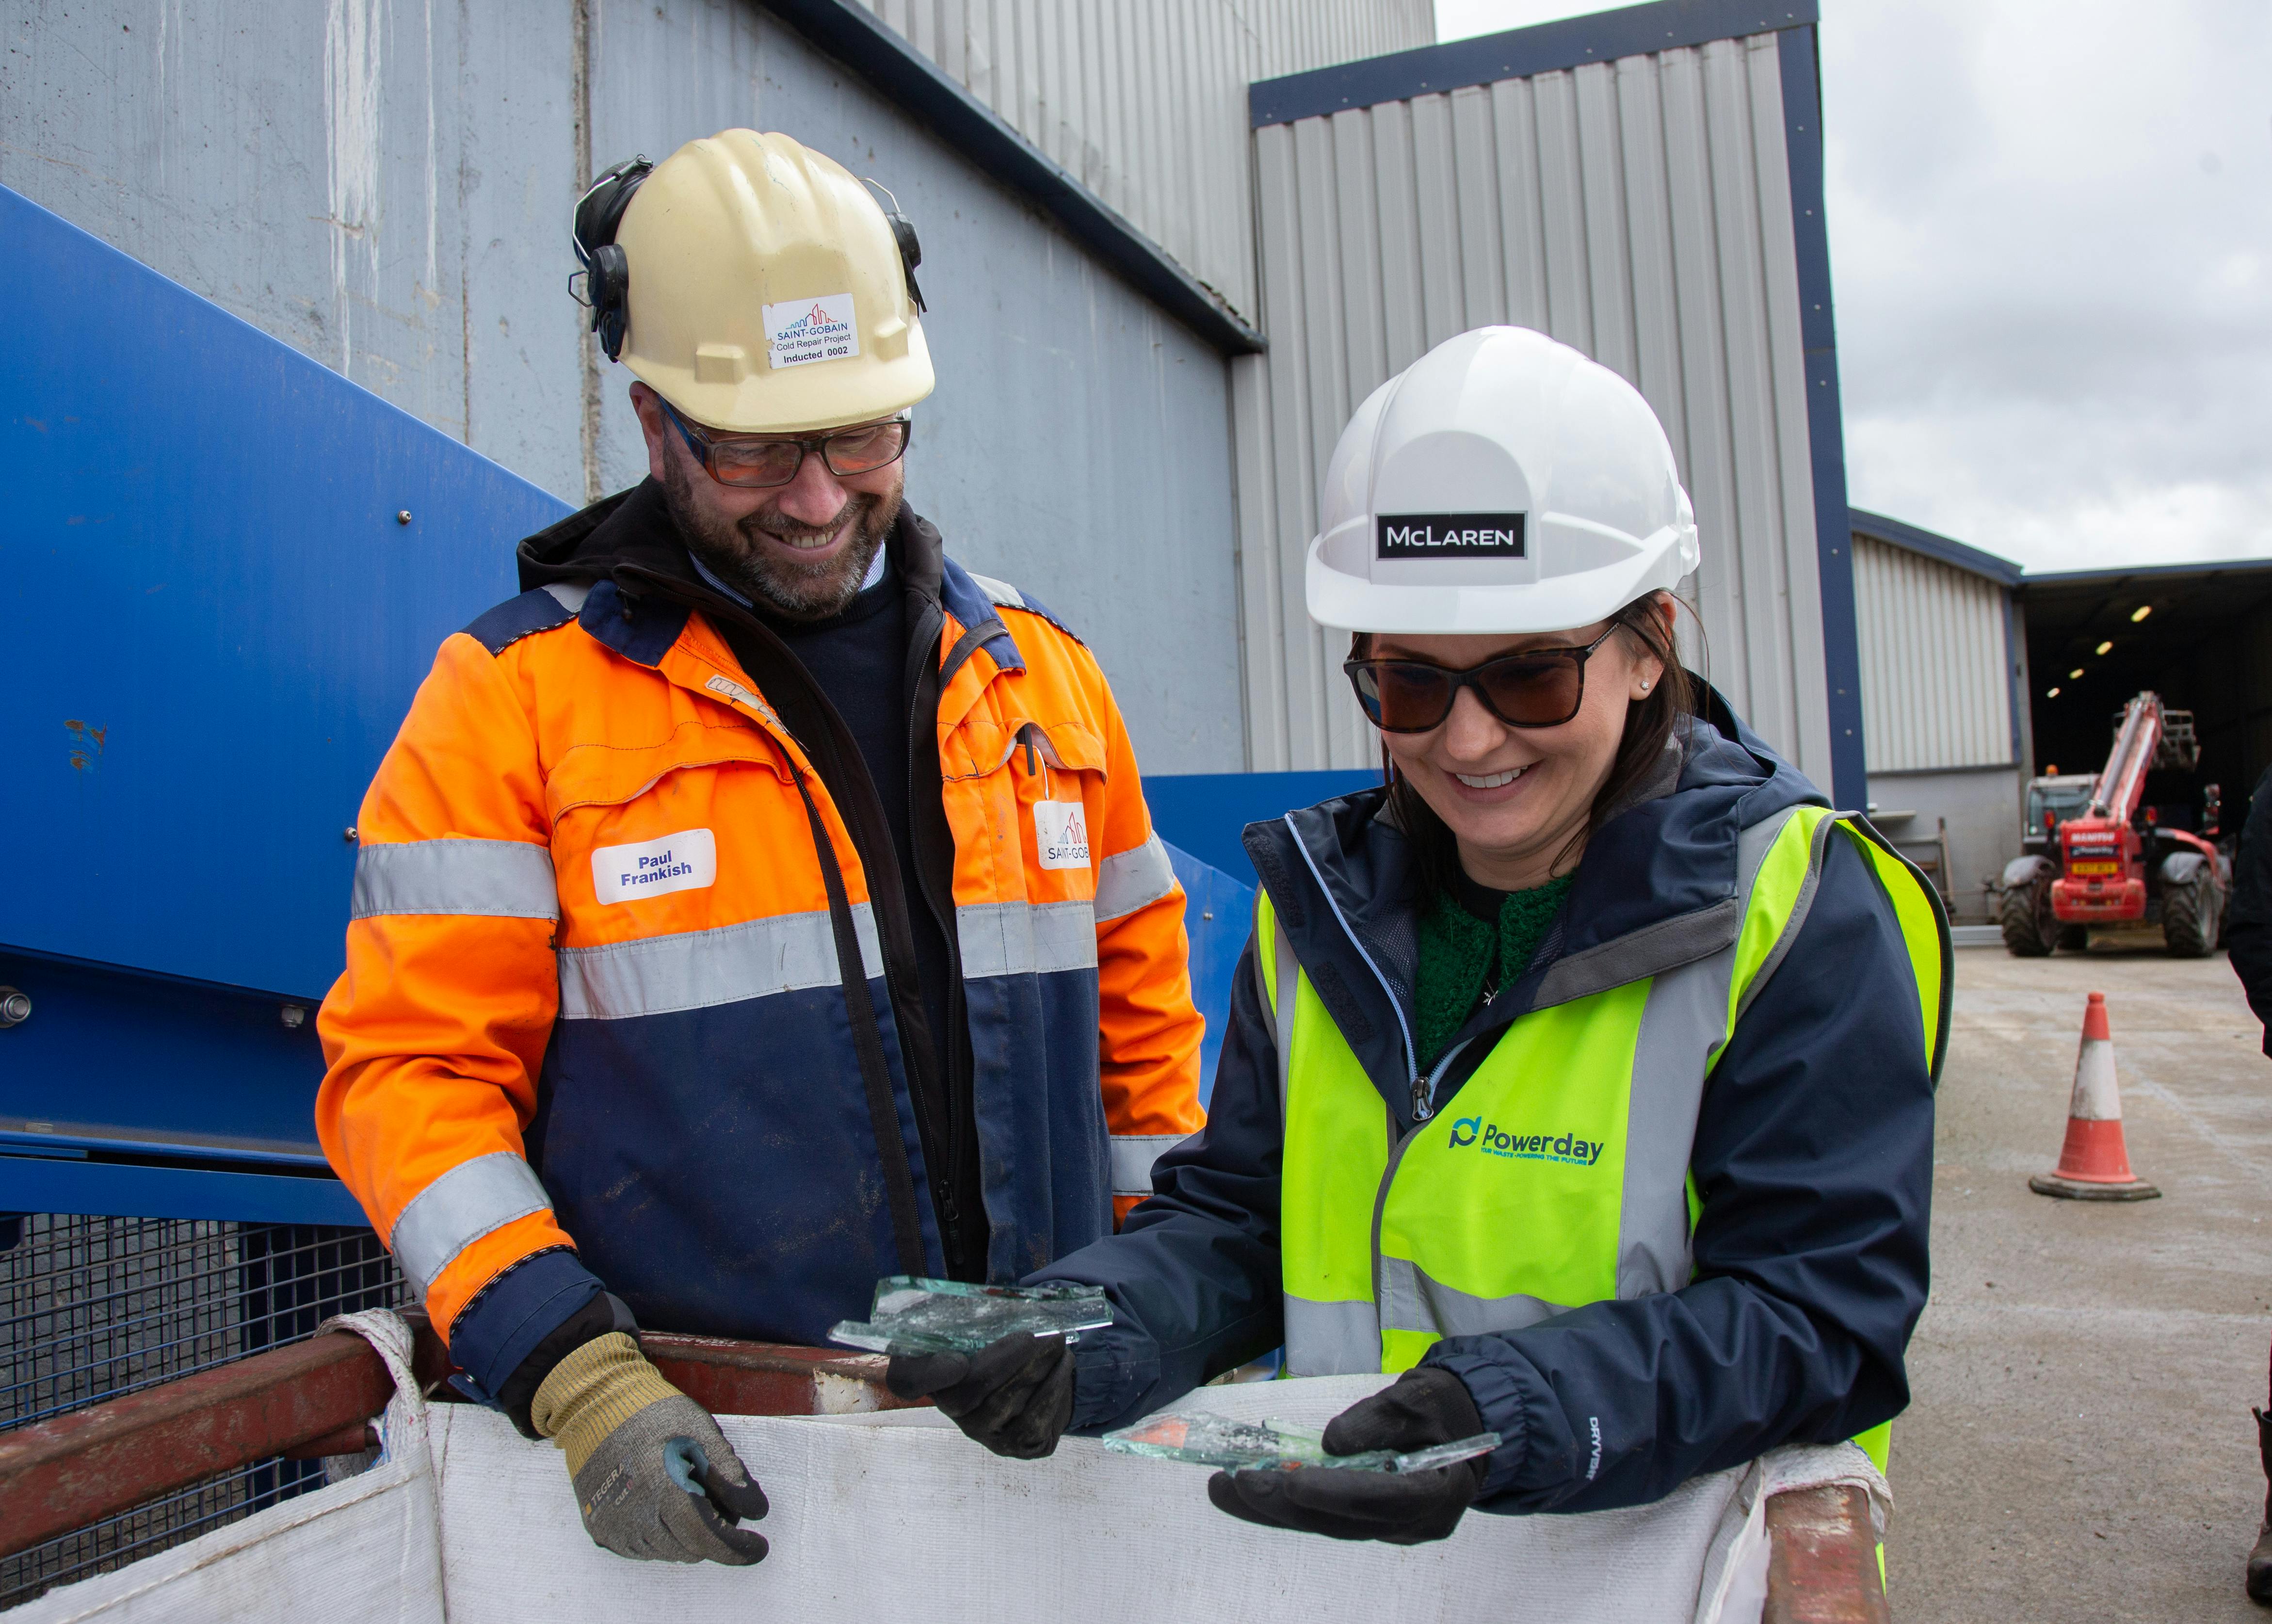 St Gobain's Paul Frankish and McLaren Construction's Claire Tribe examine cullet